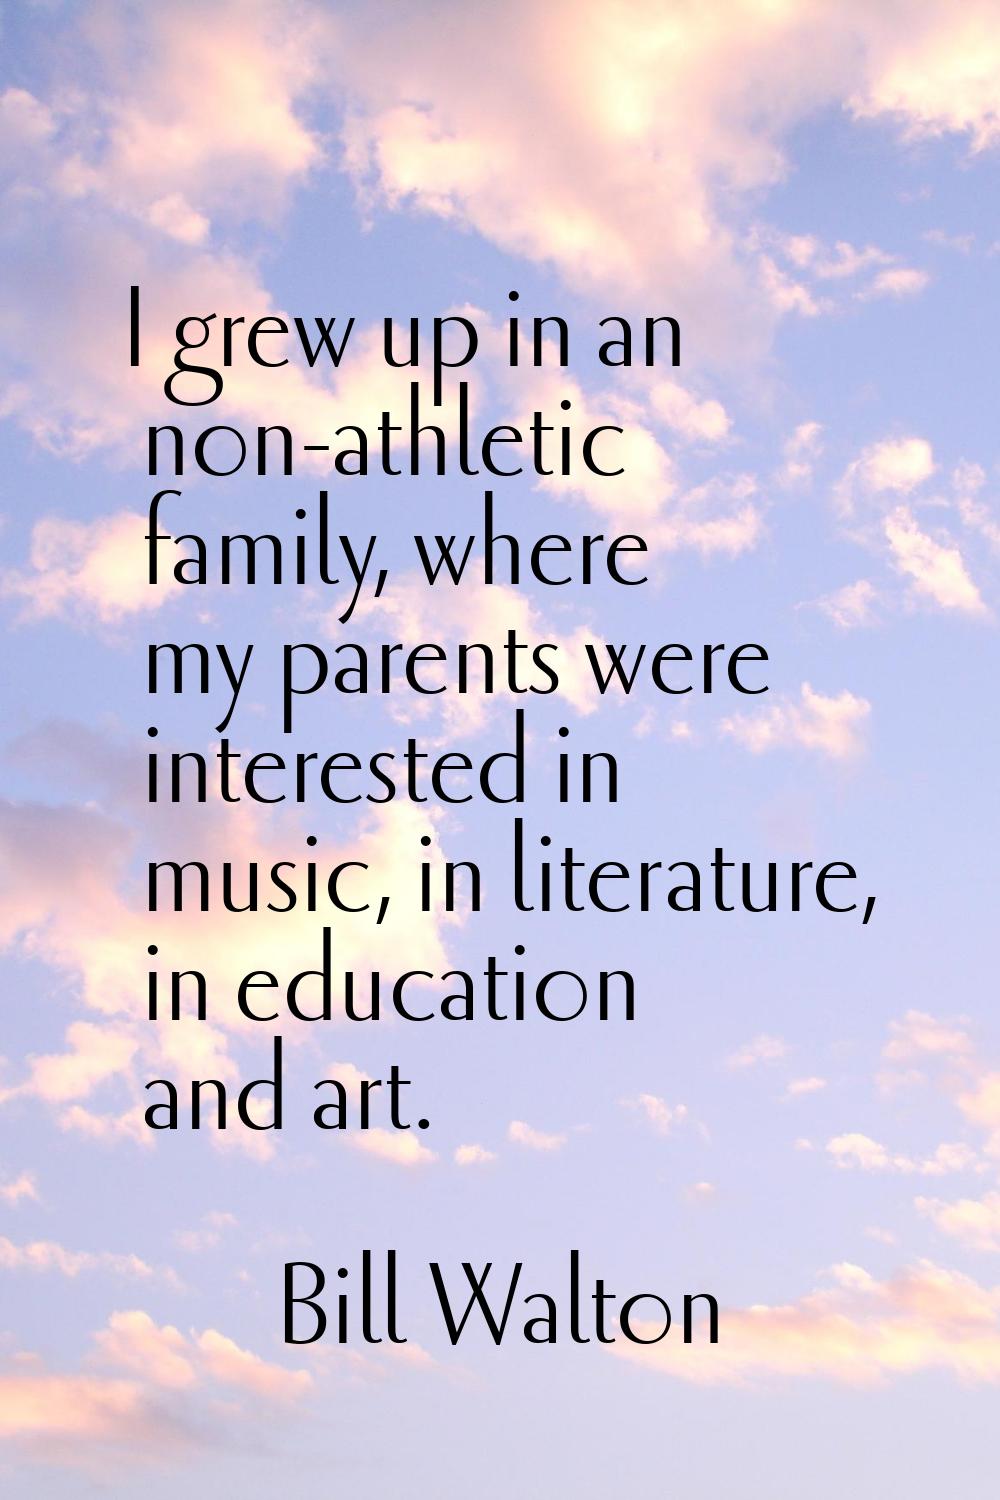 I grew up in an non-athletic family, where my parents were interested in music, in literature, in e